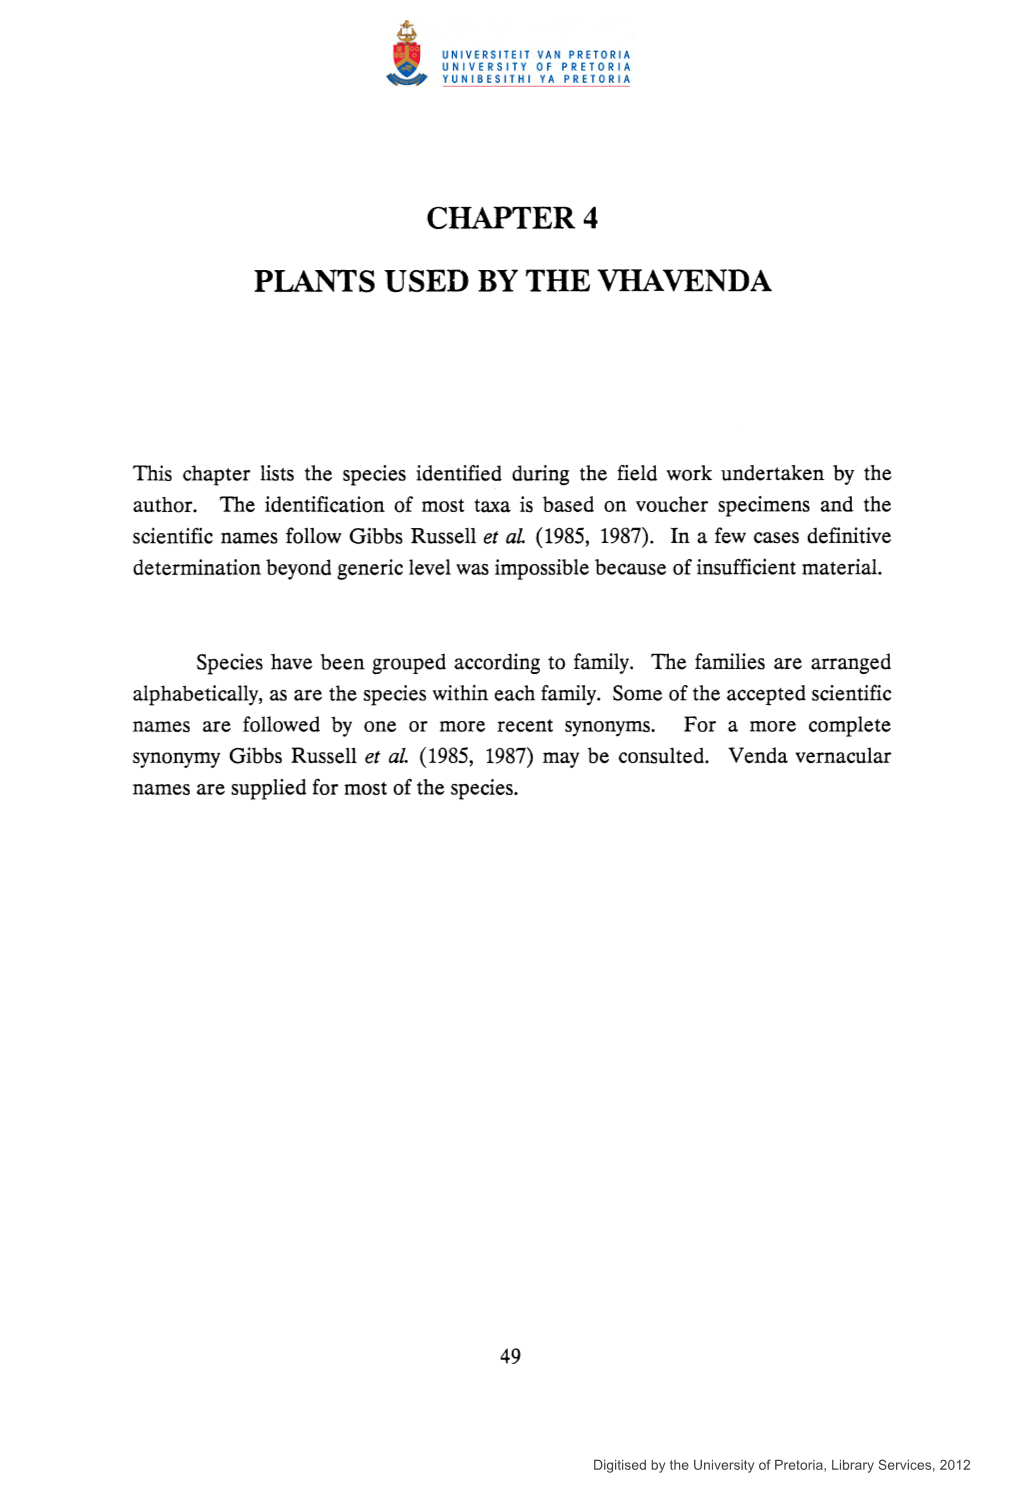 Chapter4 Plants Used by the Vha Venda